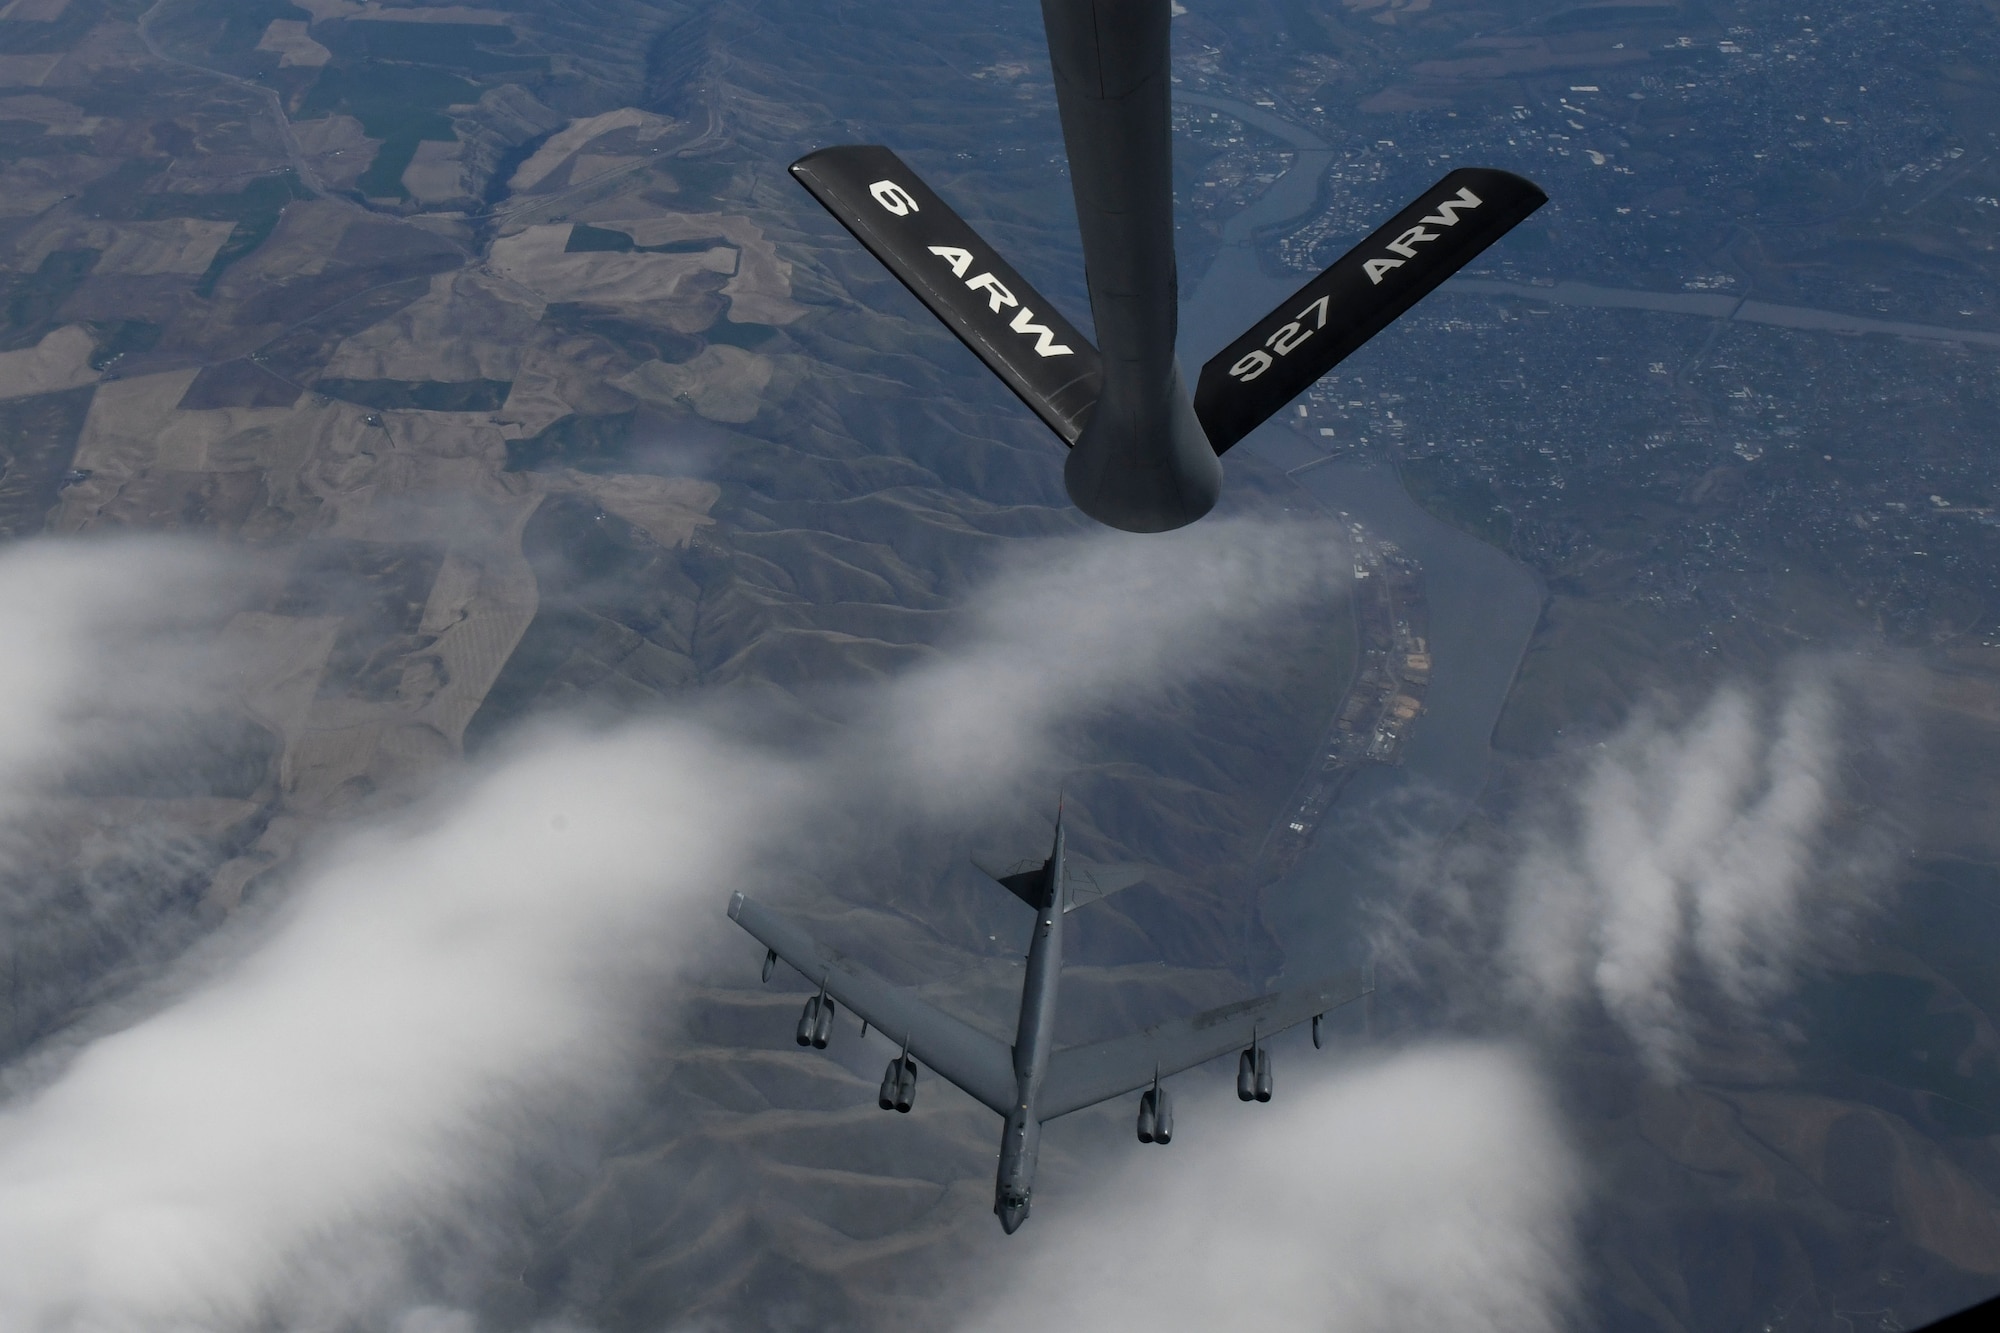 A B-52 Stratofortress flies next to a KC-135 Stratotanker assigned to the 6th Air Refueling Wing, during exercise Global Thunder 23, April 16, 2023.  Global Thunder is an annual command and control exercise designed to train U.S. Strategic Command forces and assess joint operations readiness. (U.S. Air Force photo by Capt Teri L. Bunce)